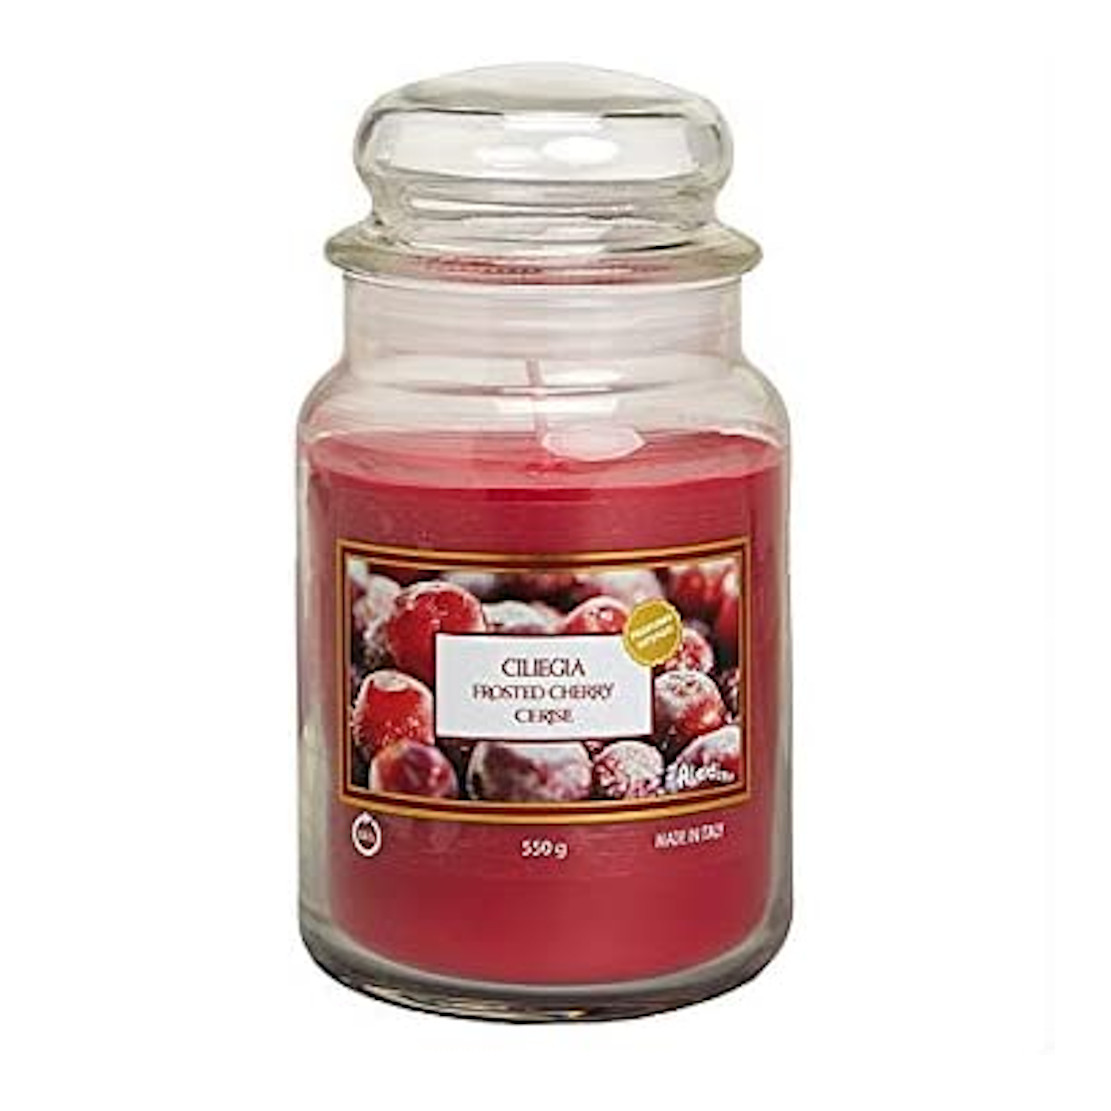 Prices Candles Aladino Frosted Black Cherry Large Jar